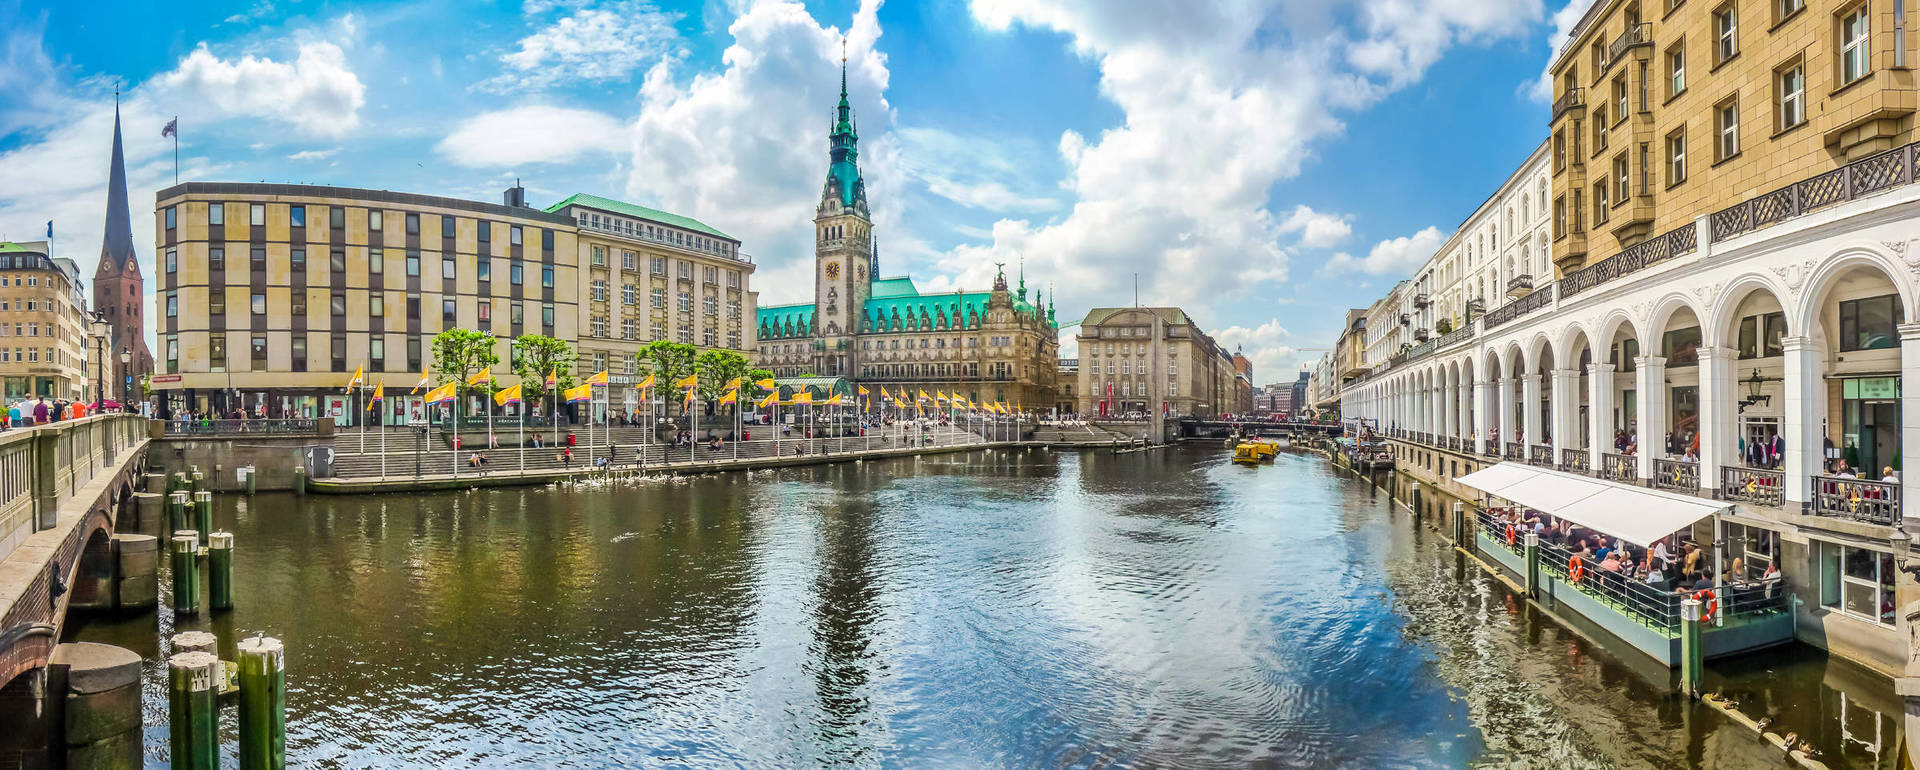 Discover Hamburg with the attractive offers of the H4 Hotel Hamburg Bergedorf - Official website